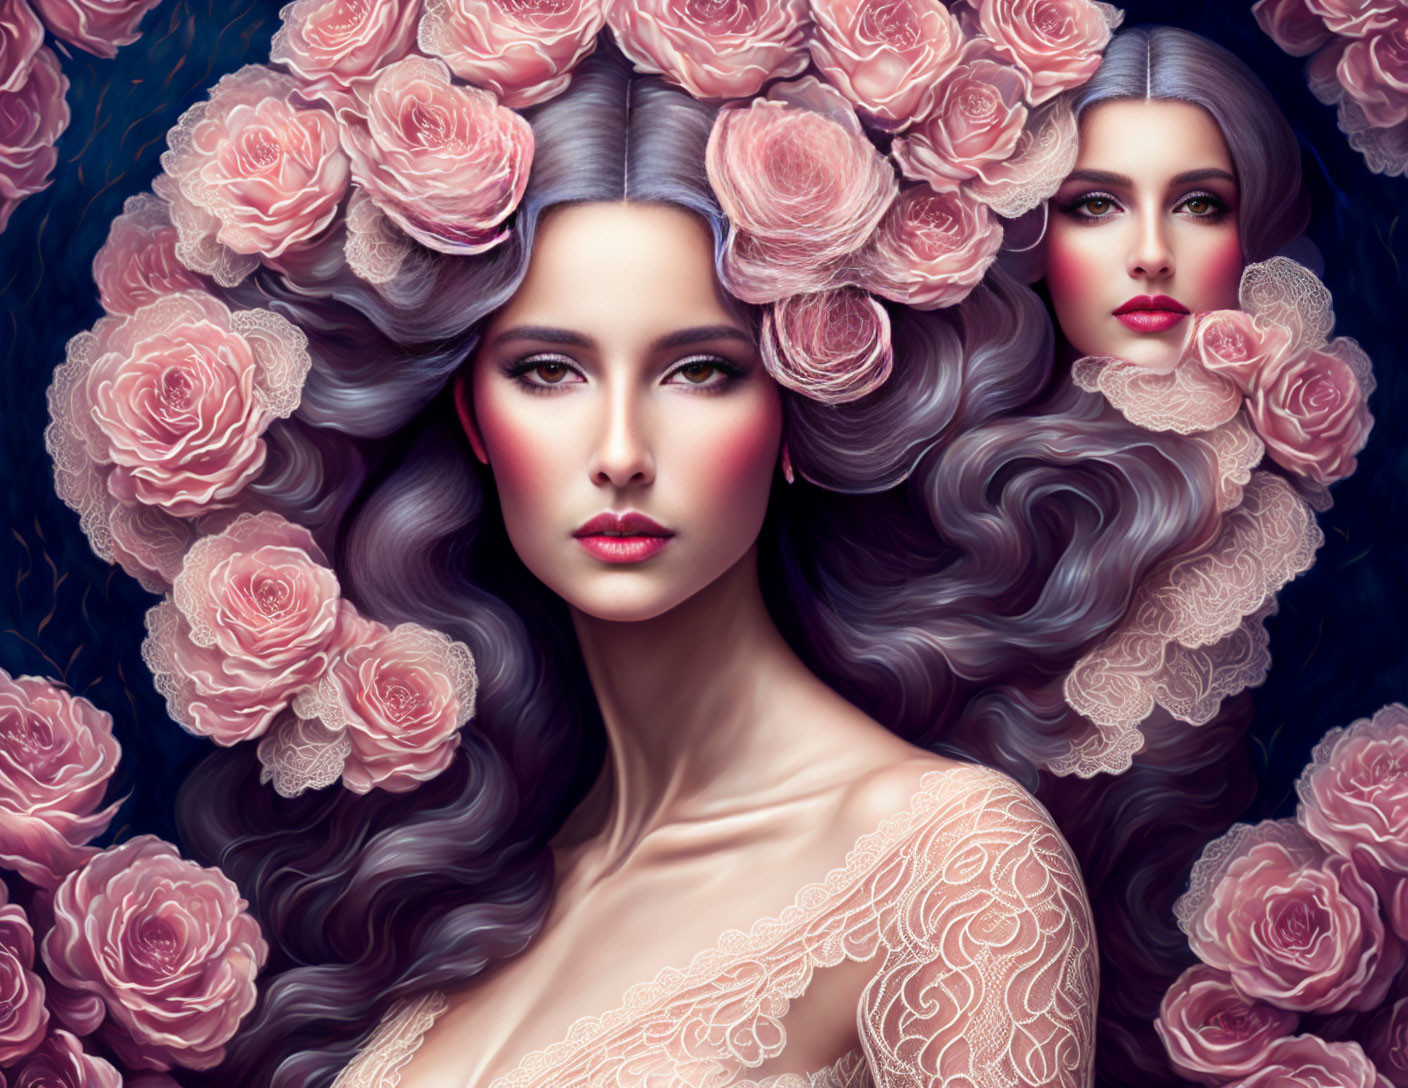 Women with flowing hair and pink roses on blue background symbolize elegance and dreamy ambiance